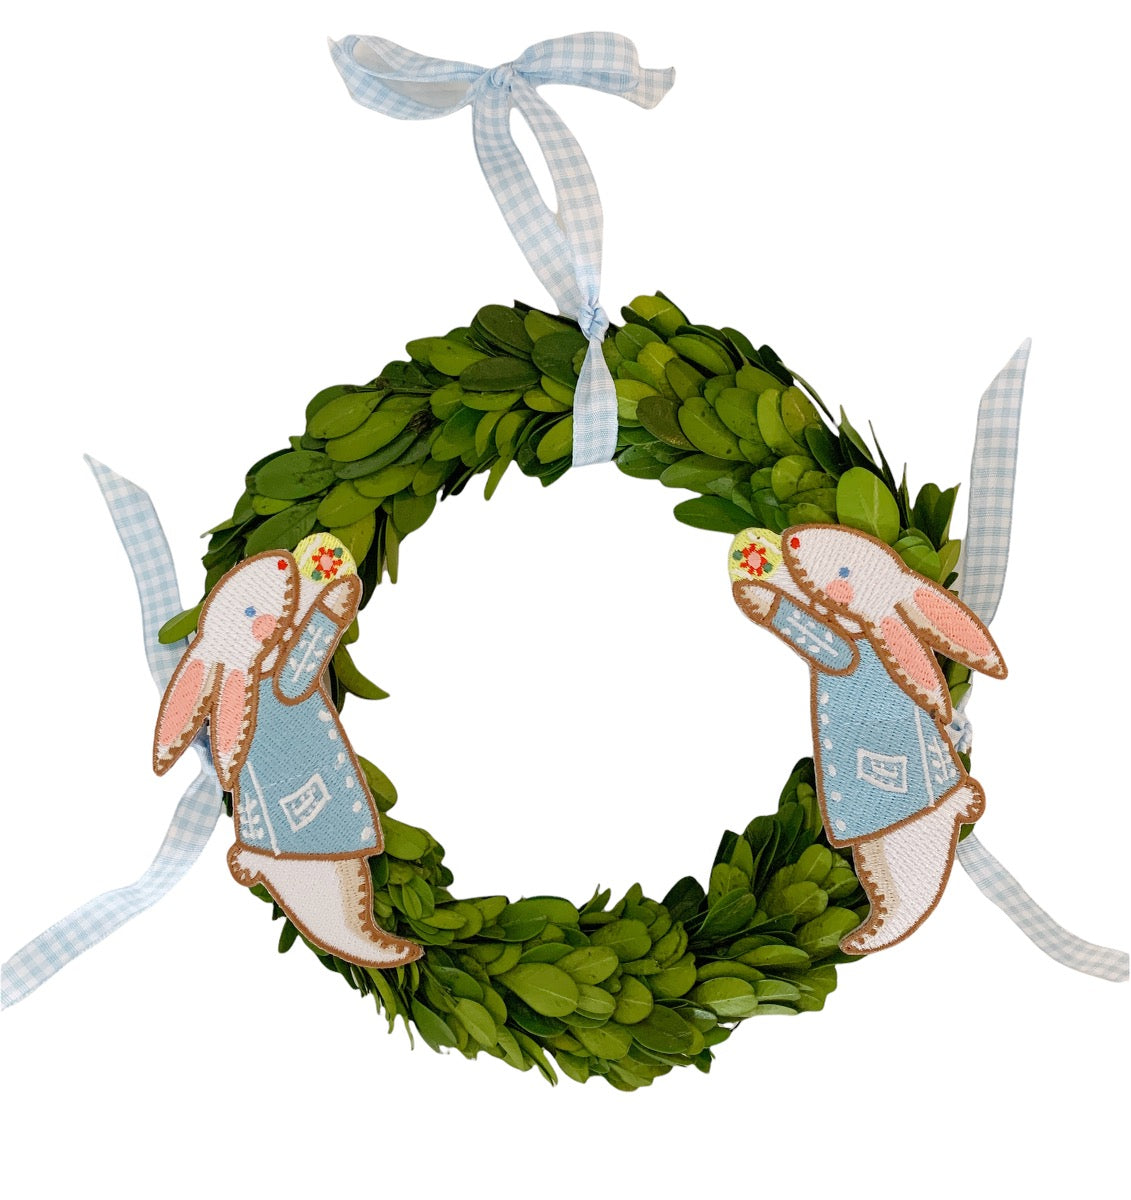 Embroidered Bunny Family Ornaments on Preserved Laurel Wreath